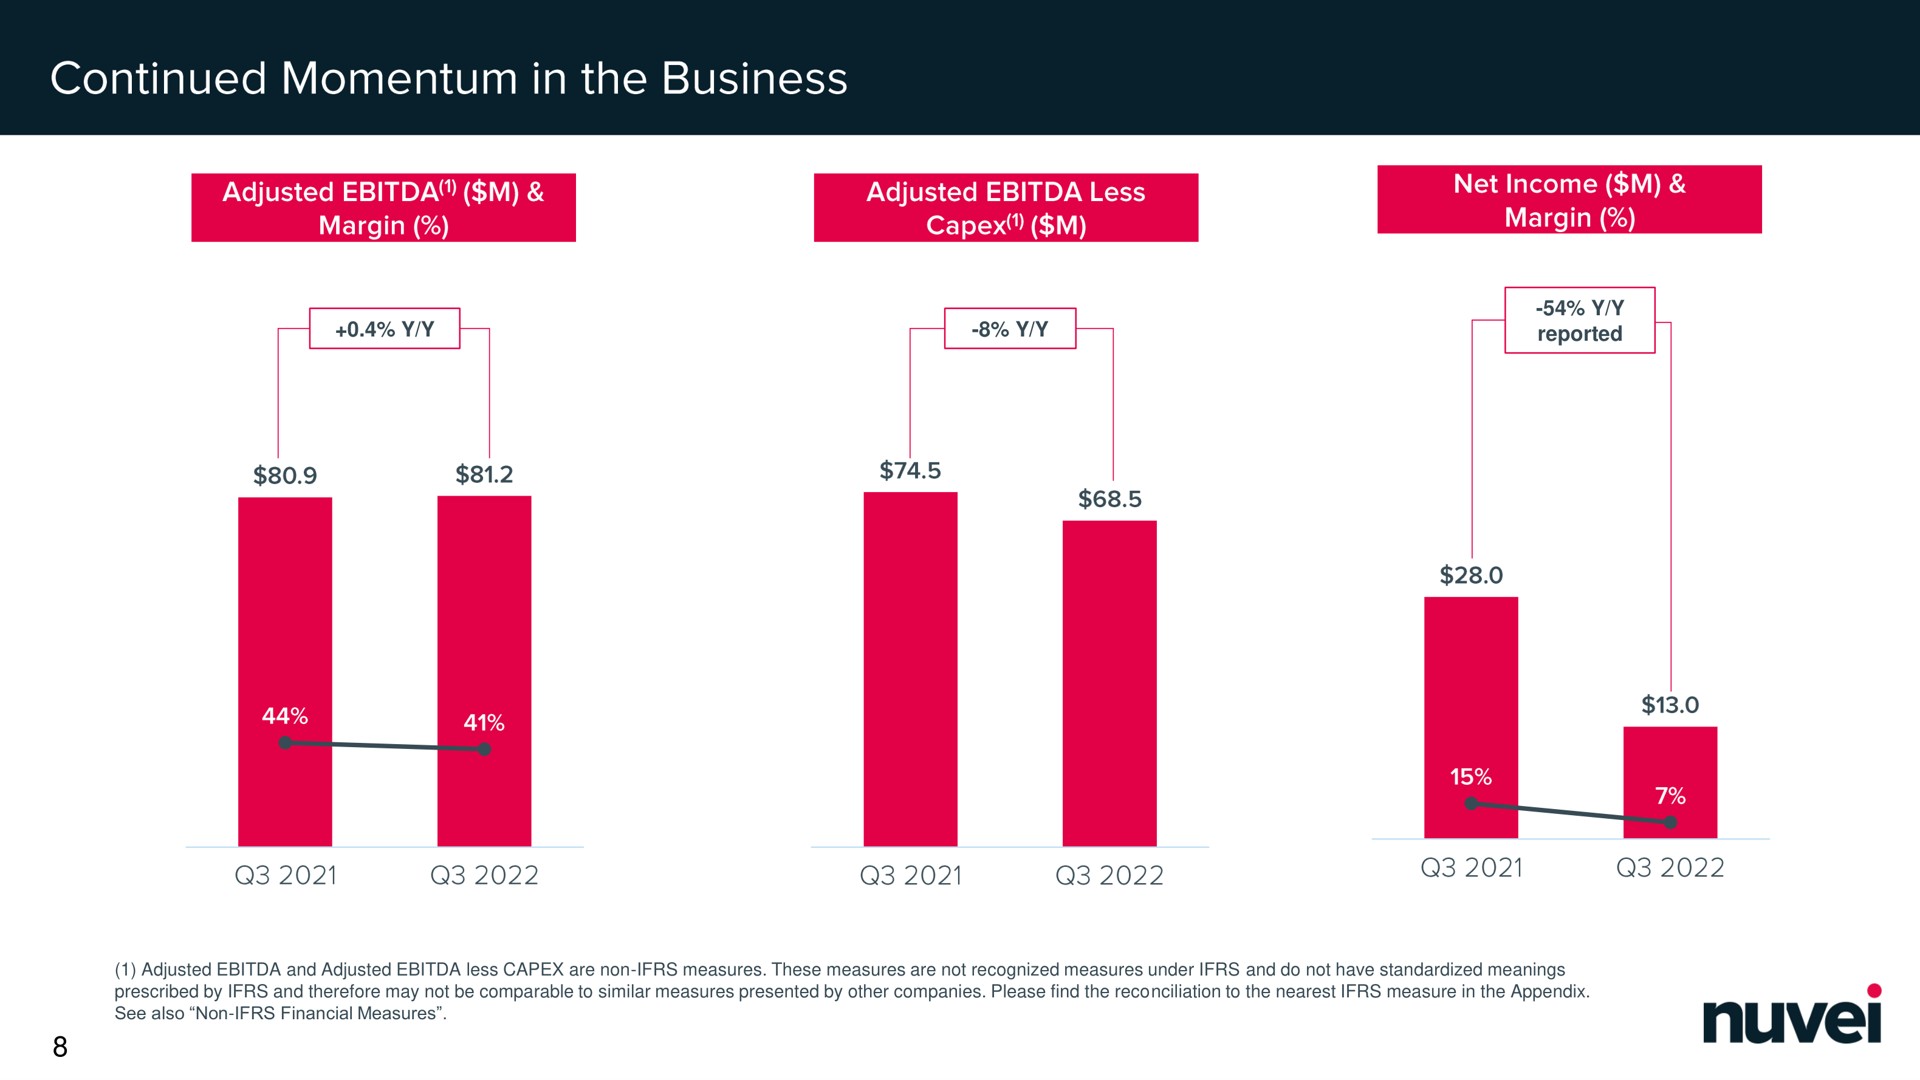 continued momentum in the business an adjusted less margin | Nuvei